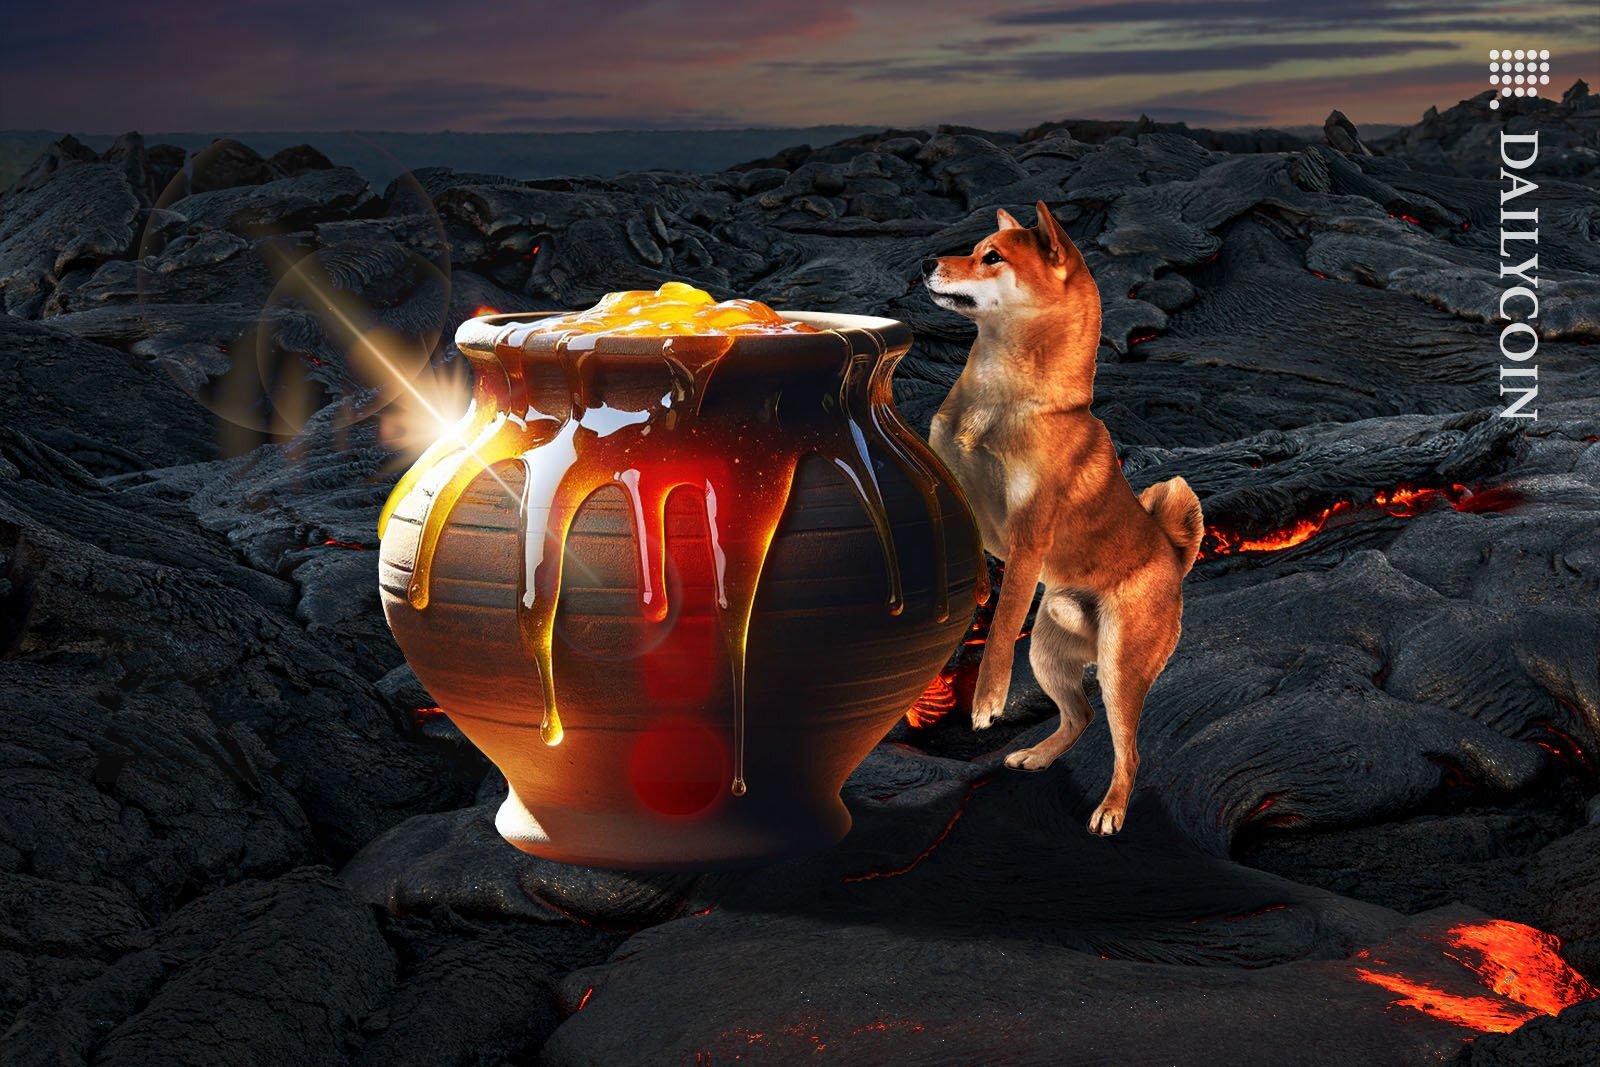 Shiba inu standing on two paws, cautiosly checking out a huge pot of honey.